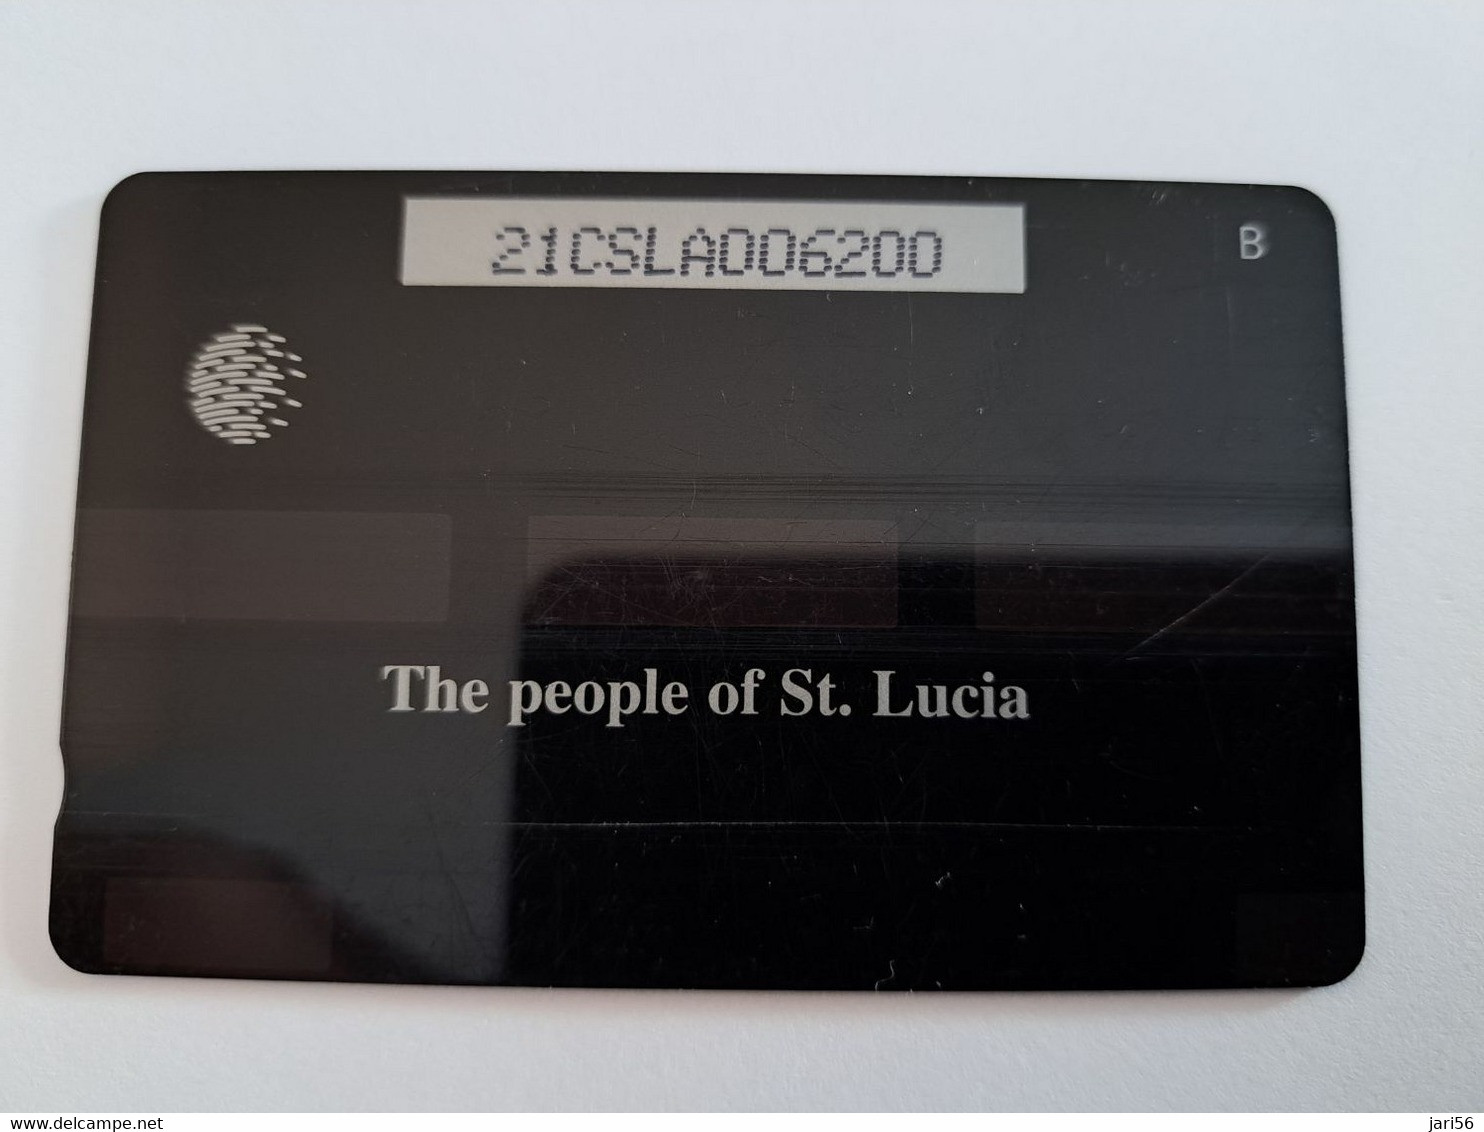 ST LUCIA    $ 10   CABLE & WIRELESS  STL-21A  21CSLA       Fine Used Card ** 10881** - St. Lucia